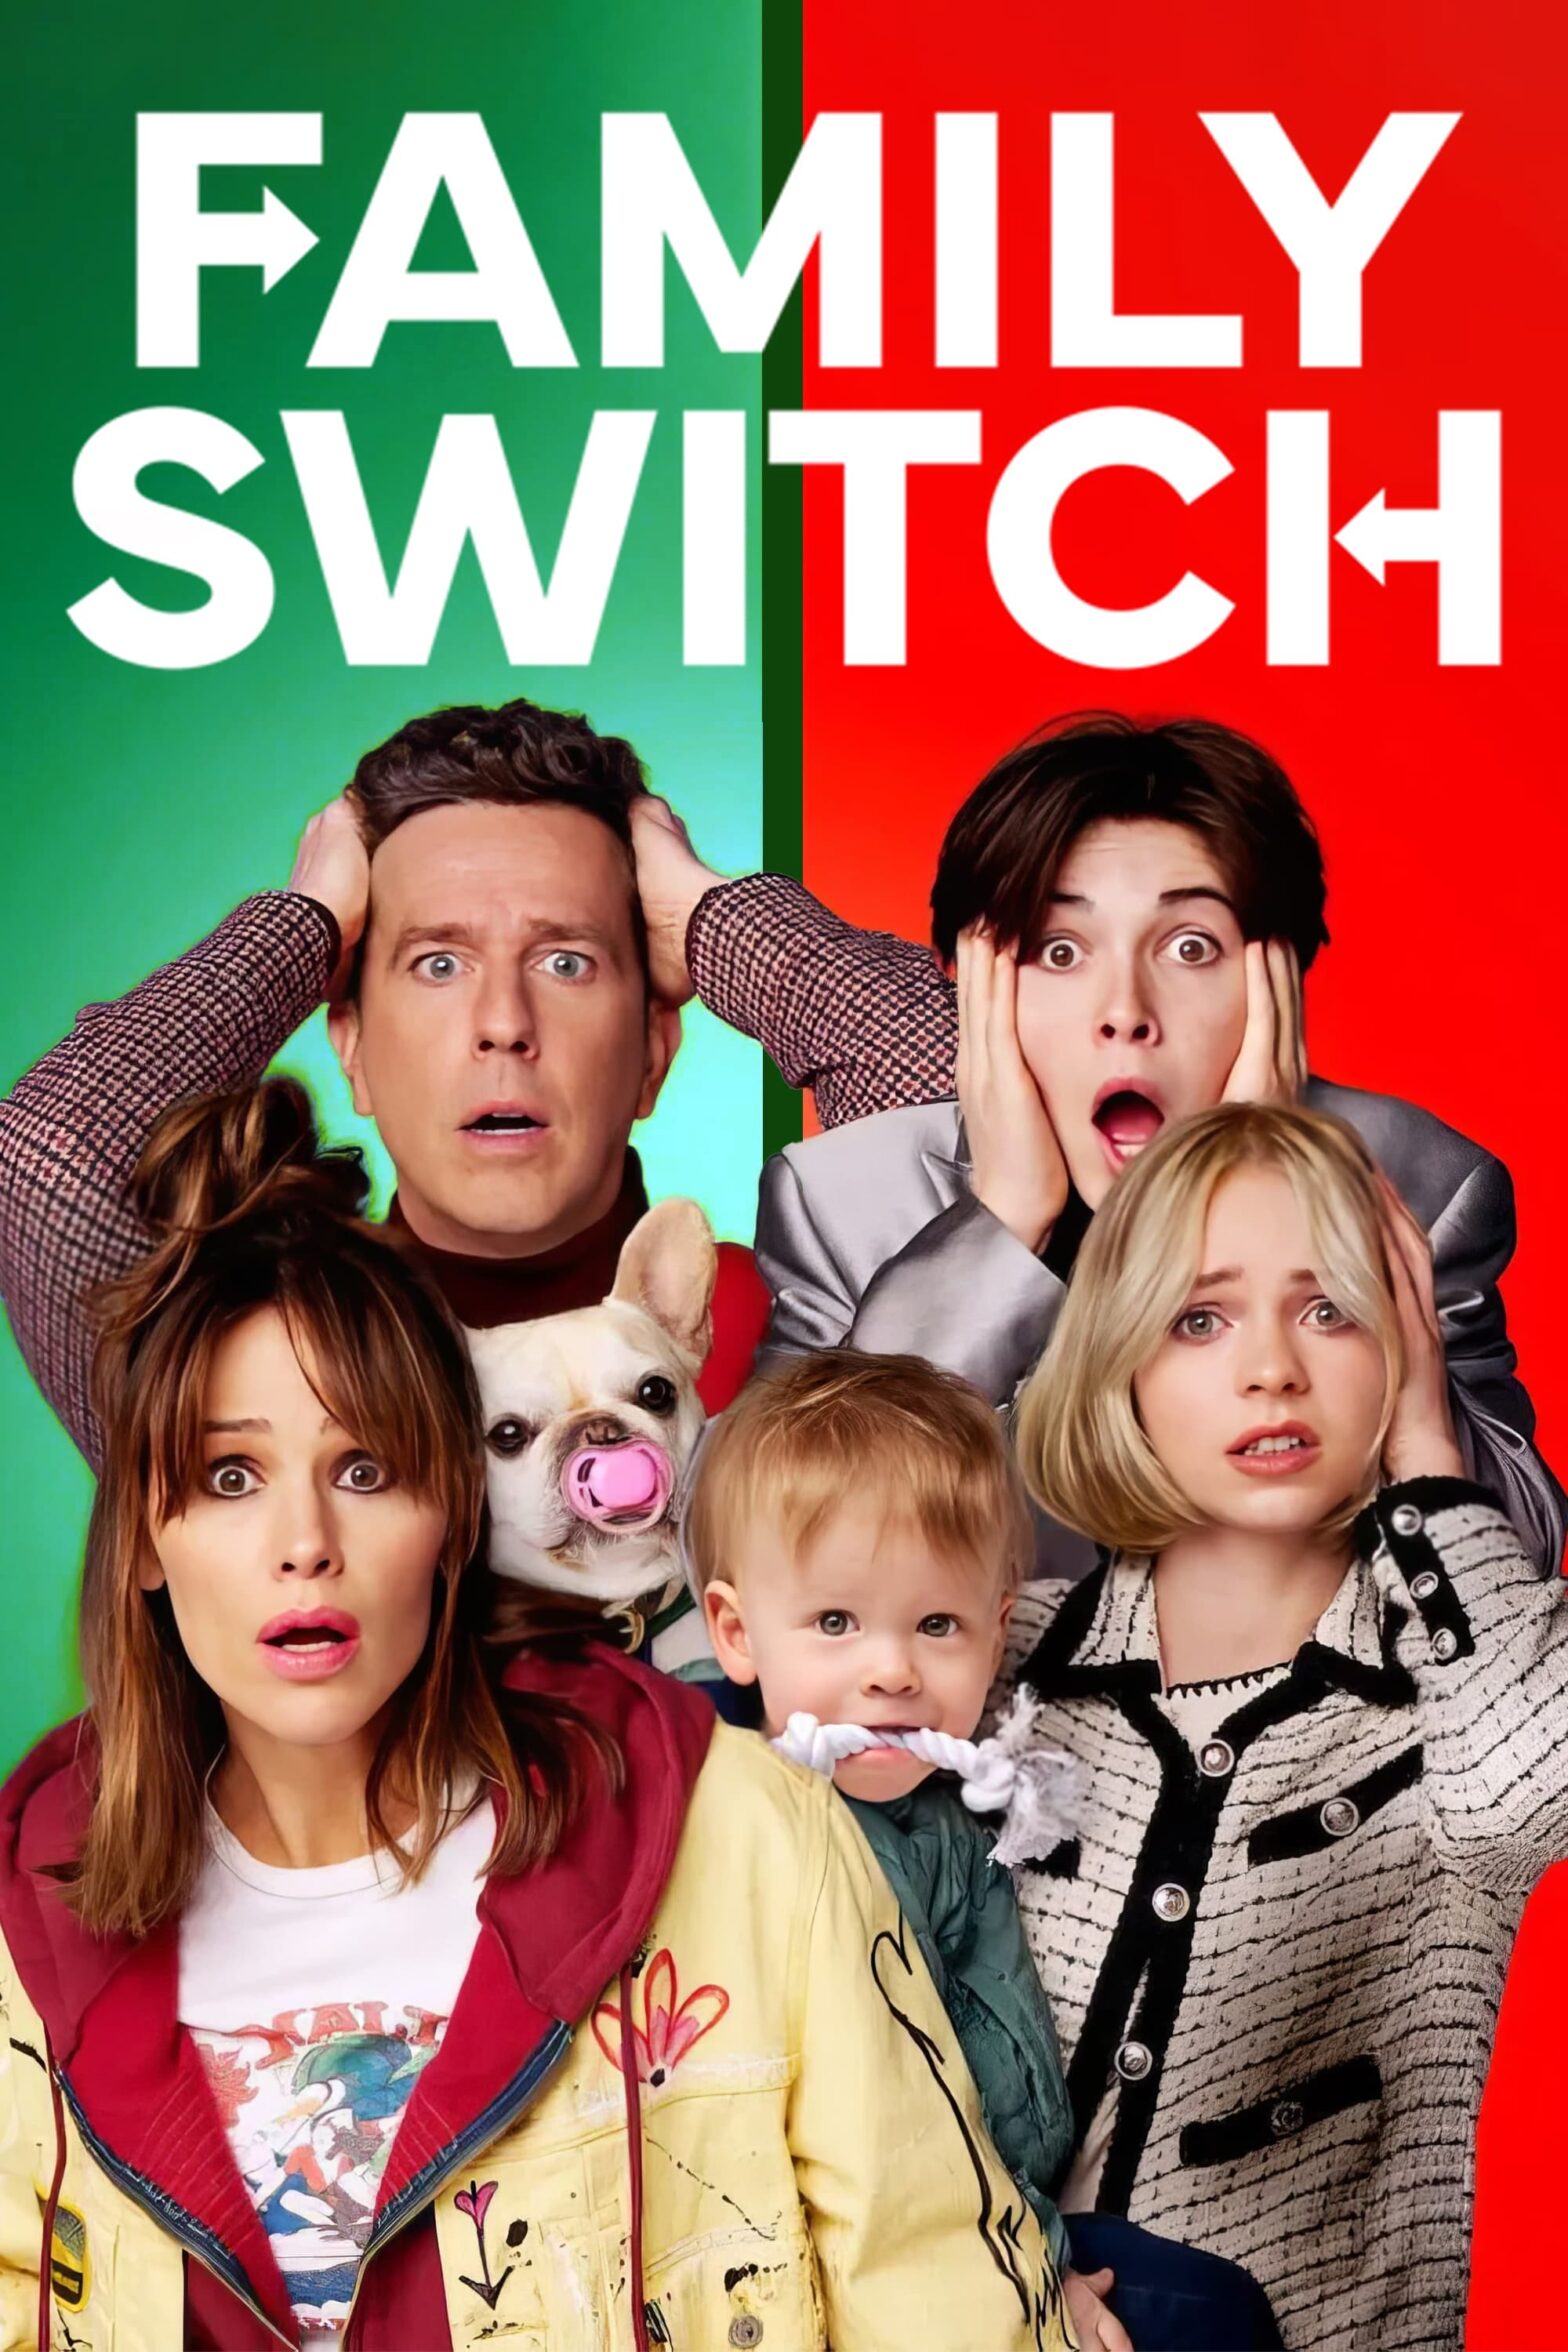 Poster for the movie "Family Switch"